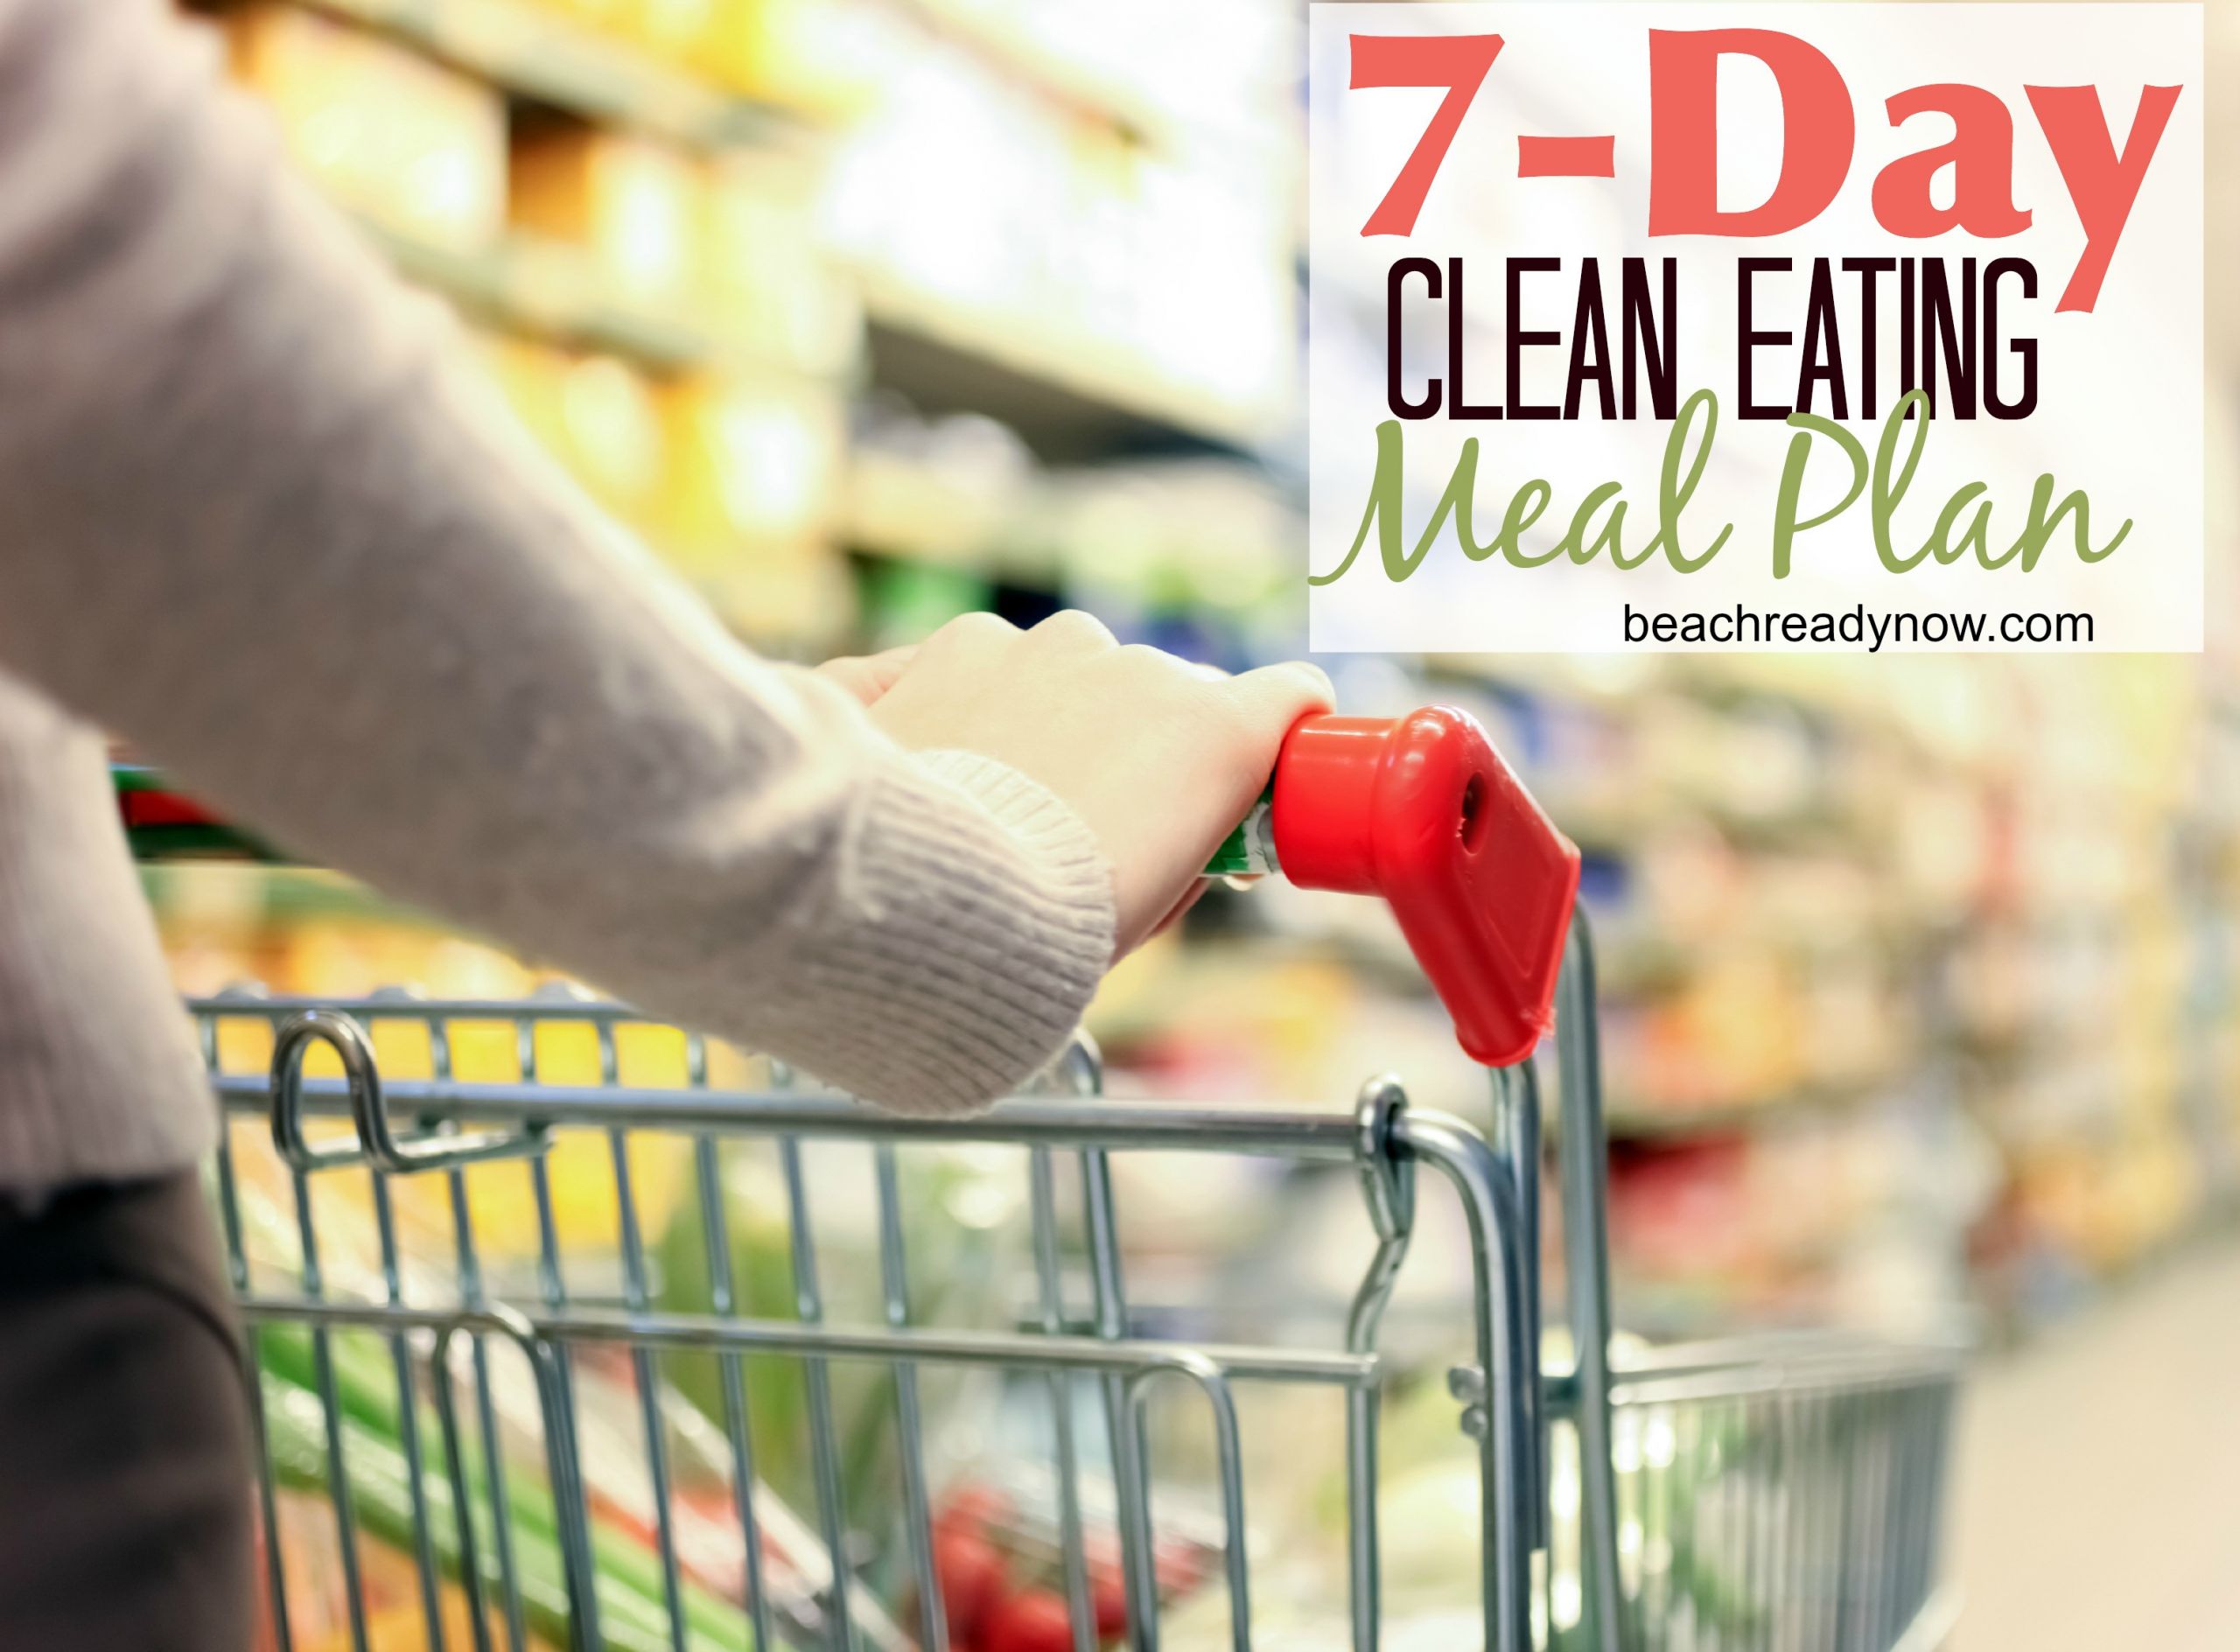 Clean Eating 7 Day Meal Plan
 7 Day Clean Eating Meal Plan Beach Ready Now